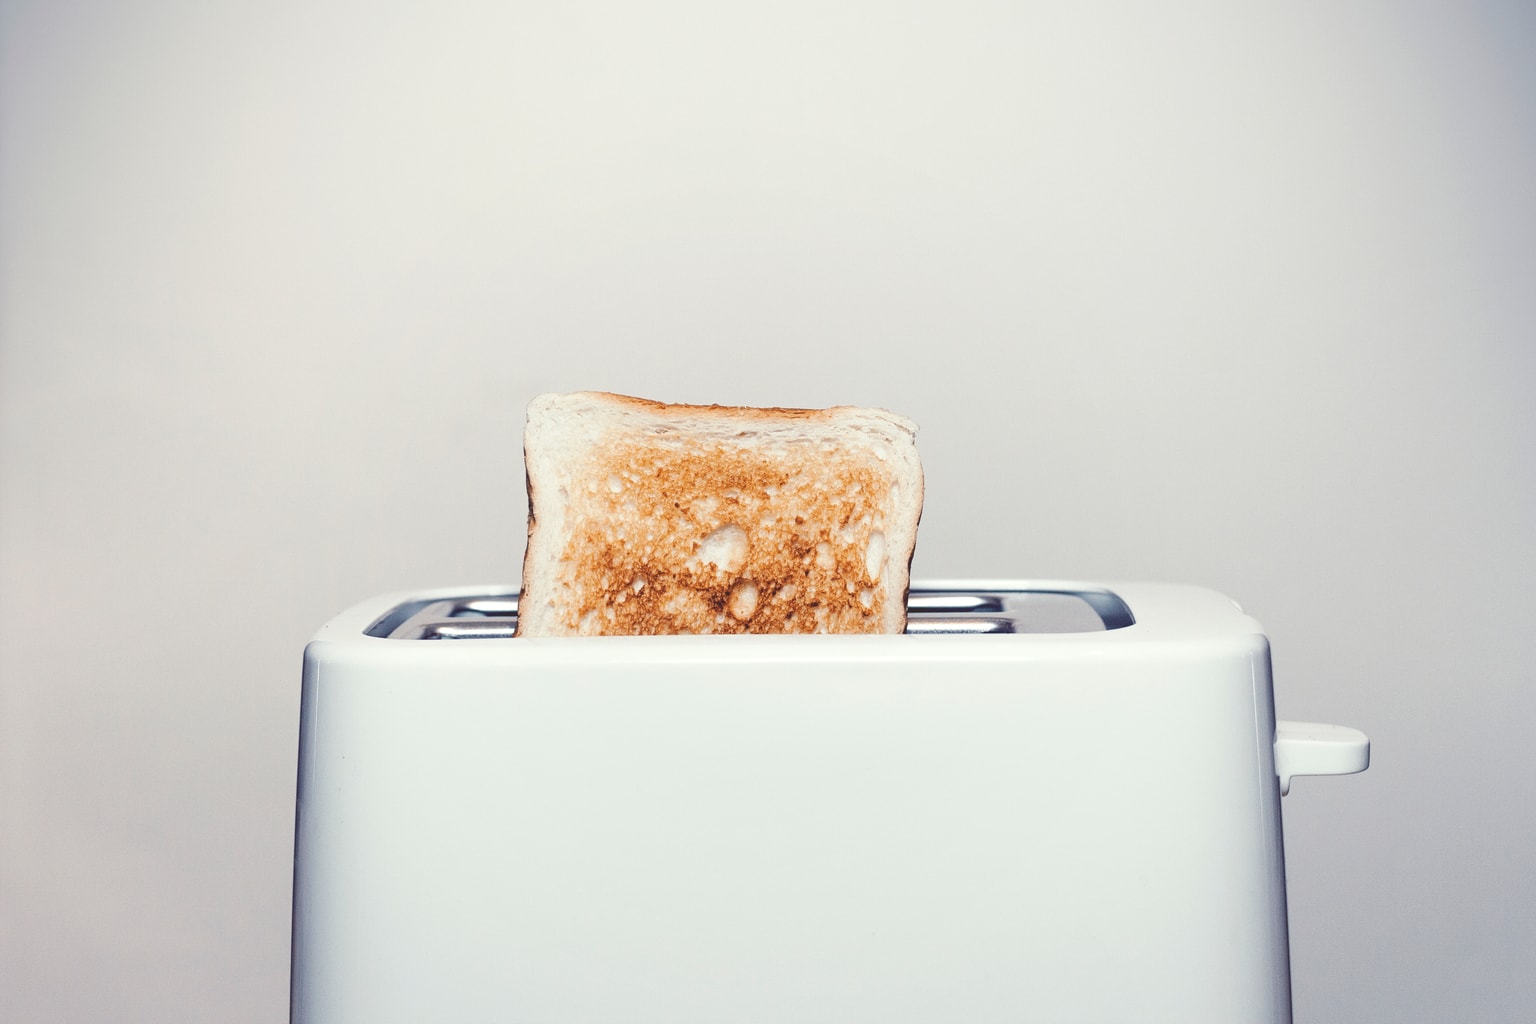 A piece of toast popping out of a white toaster against a gray background.